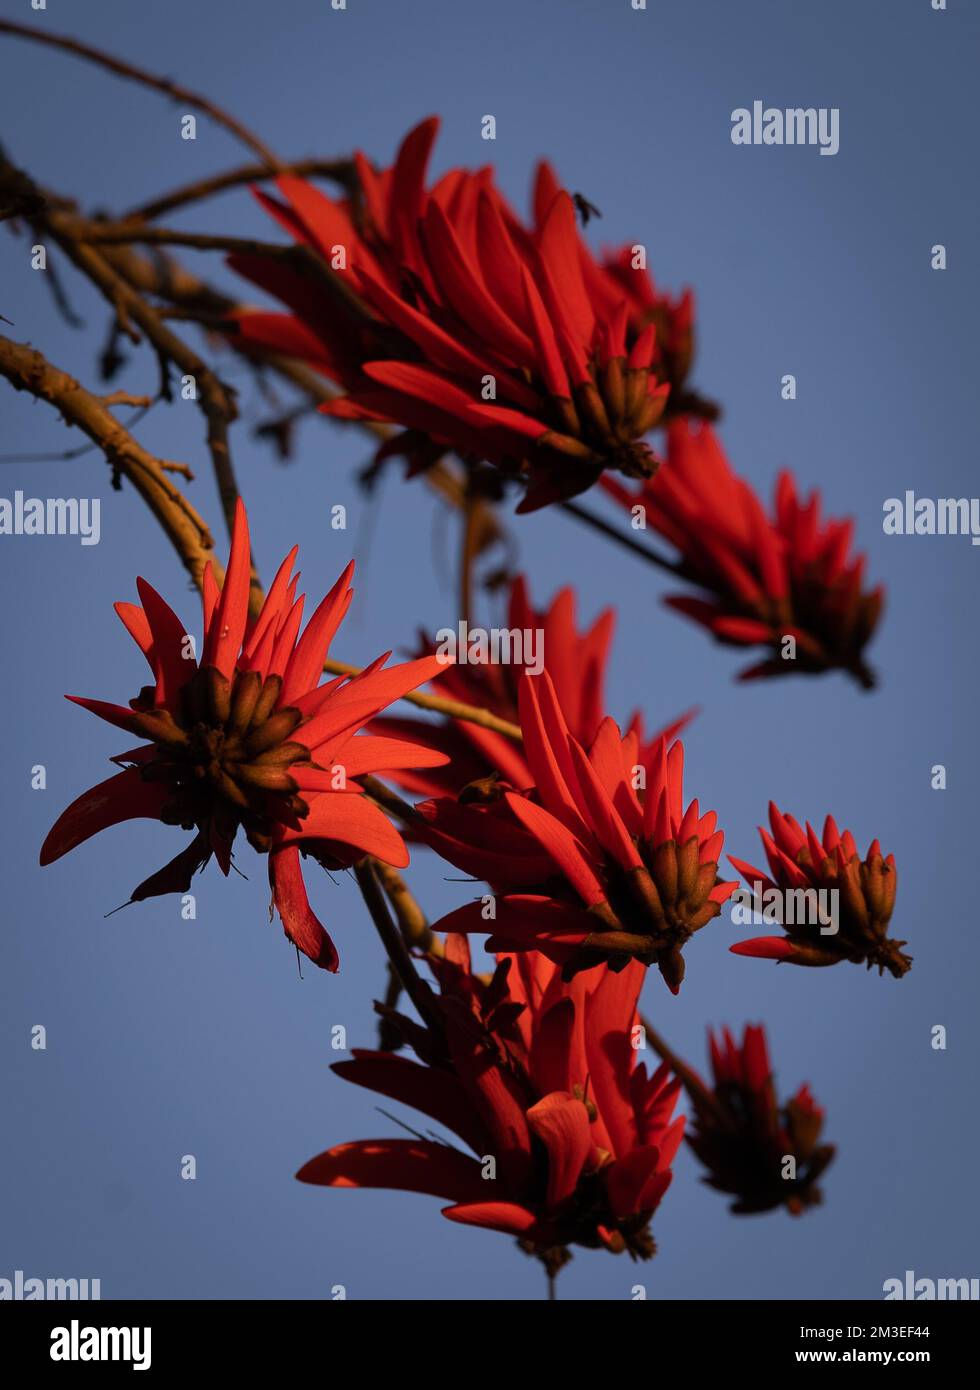 A vertical closeup of red flowers on Erythrina tree on blue background Stock Photo